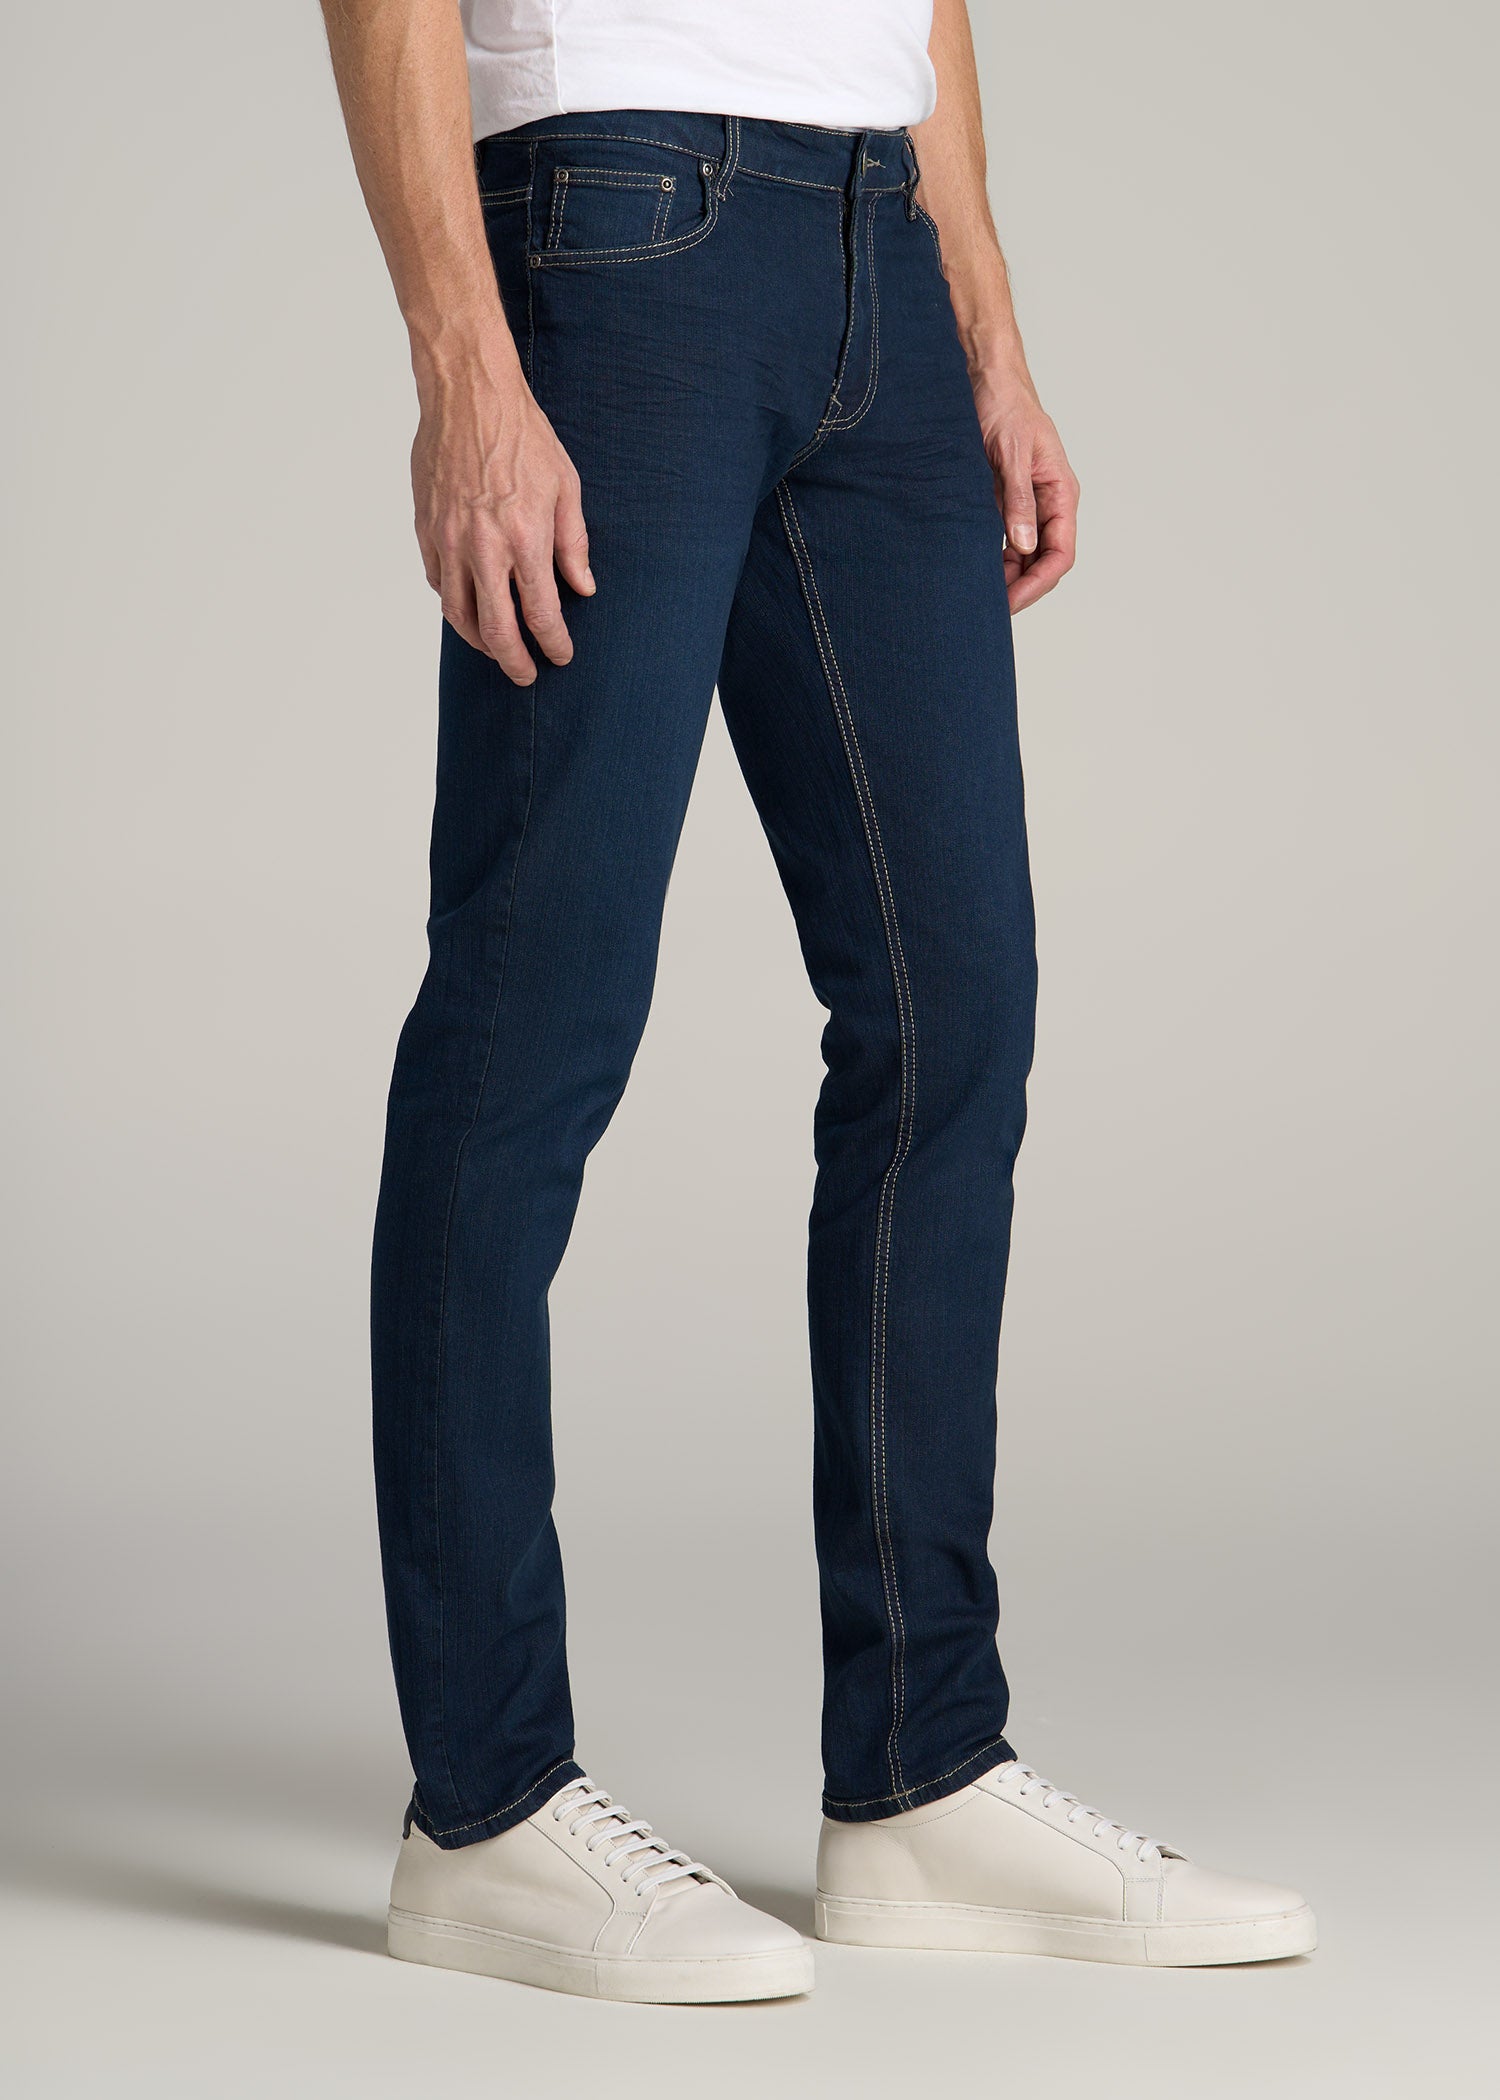 Carman Tapered Jeans For Tall American Men Tall | Blue-Steel